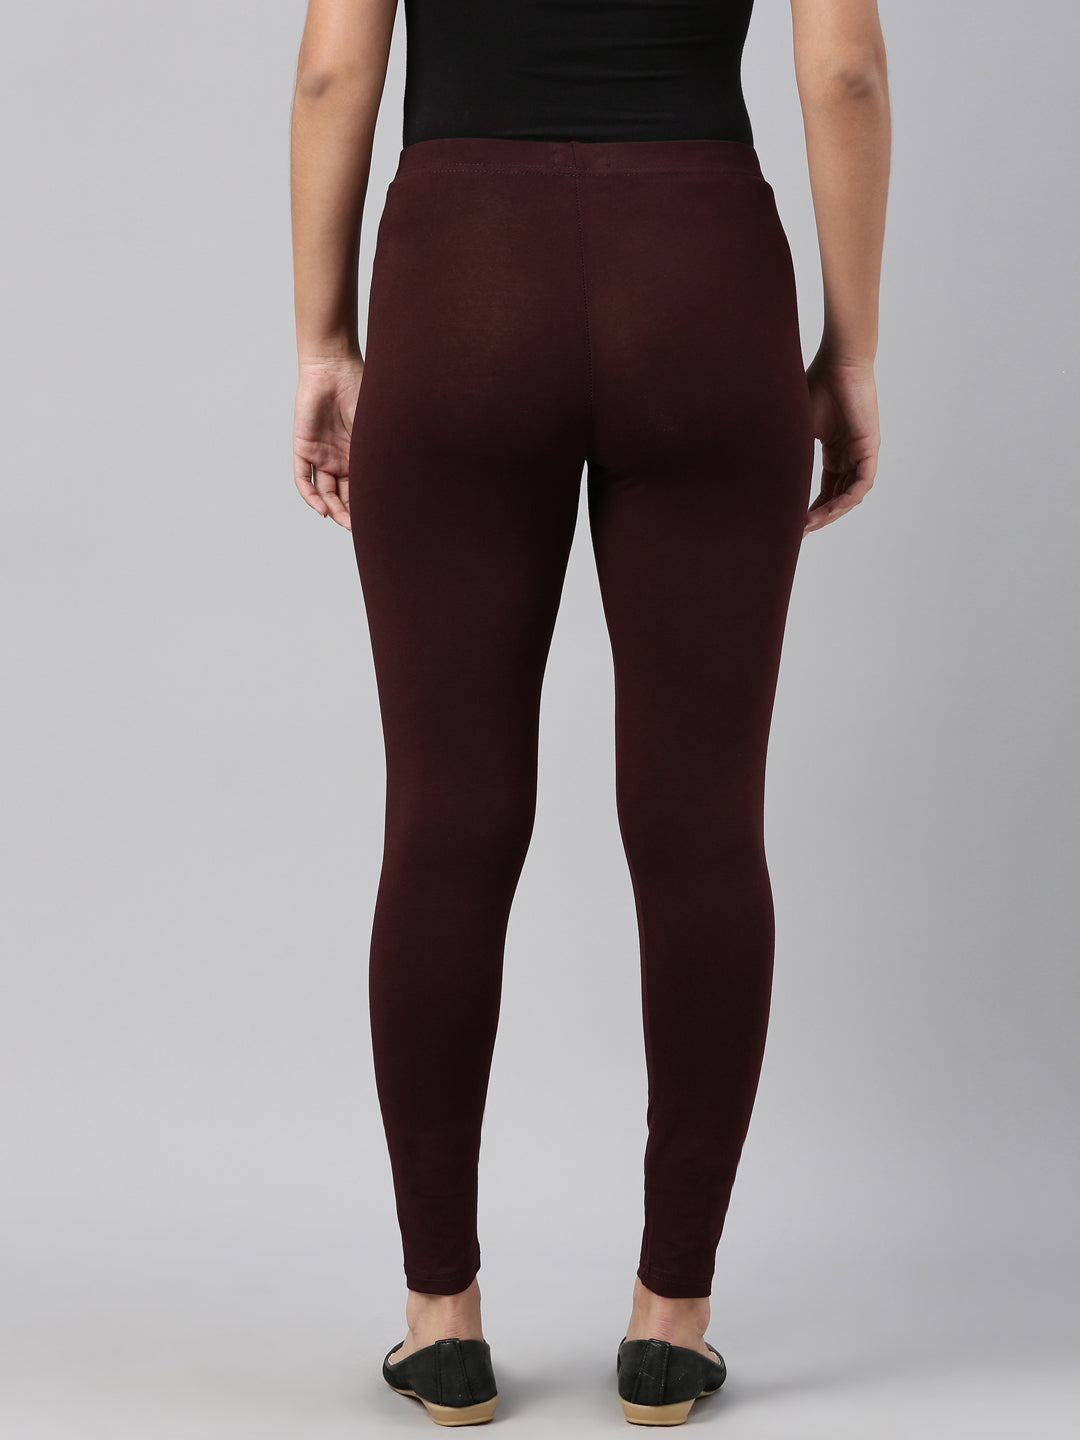 Solid Color 5 Inch Super Waisted Ankle Length Leggings with Gift Box  (Burgundy, Olive, Black) (Plus Size) - Its All Leggings